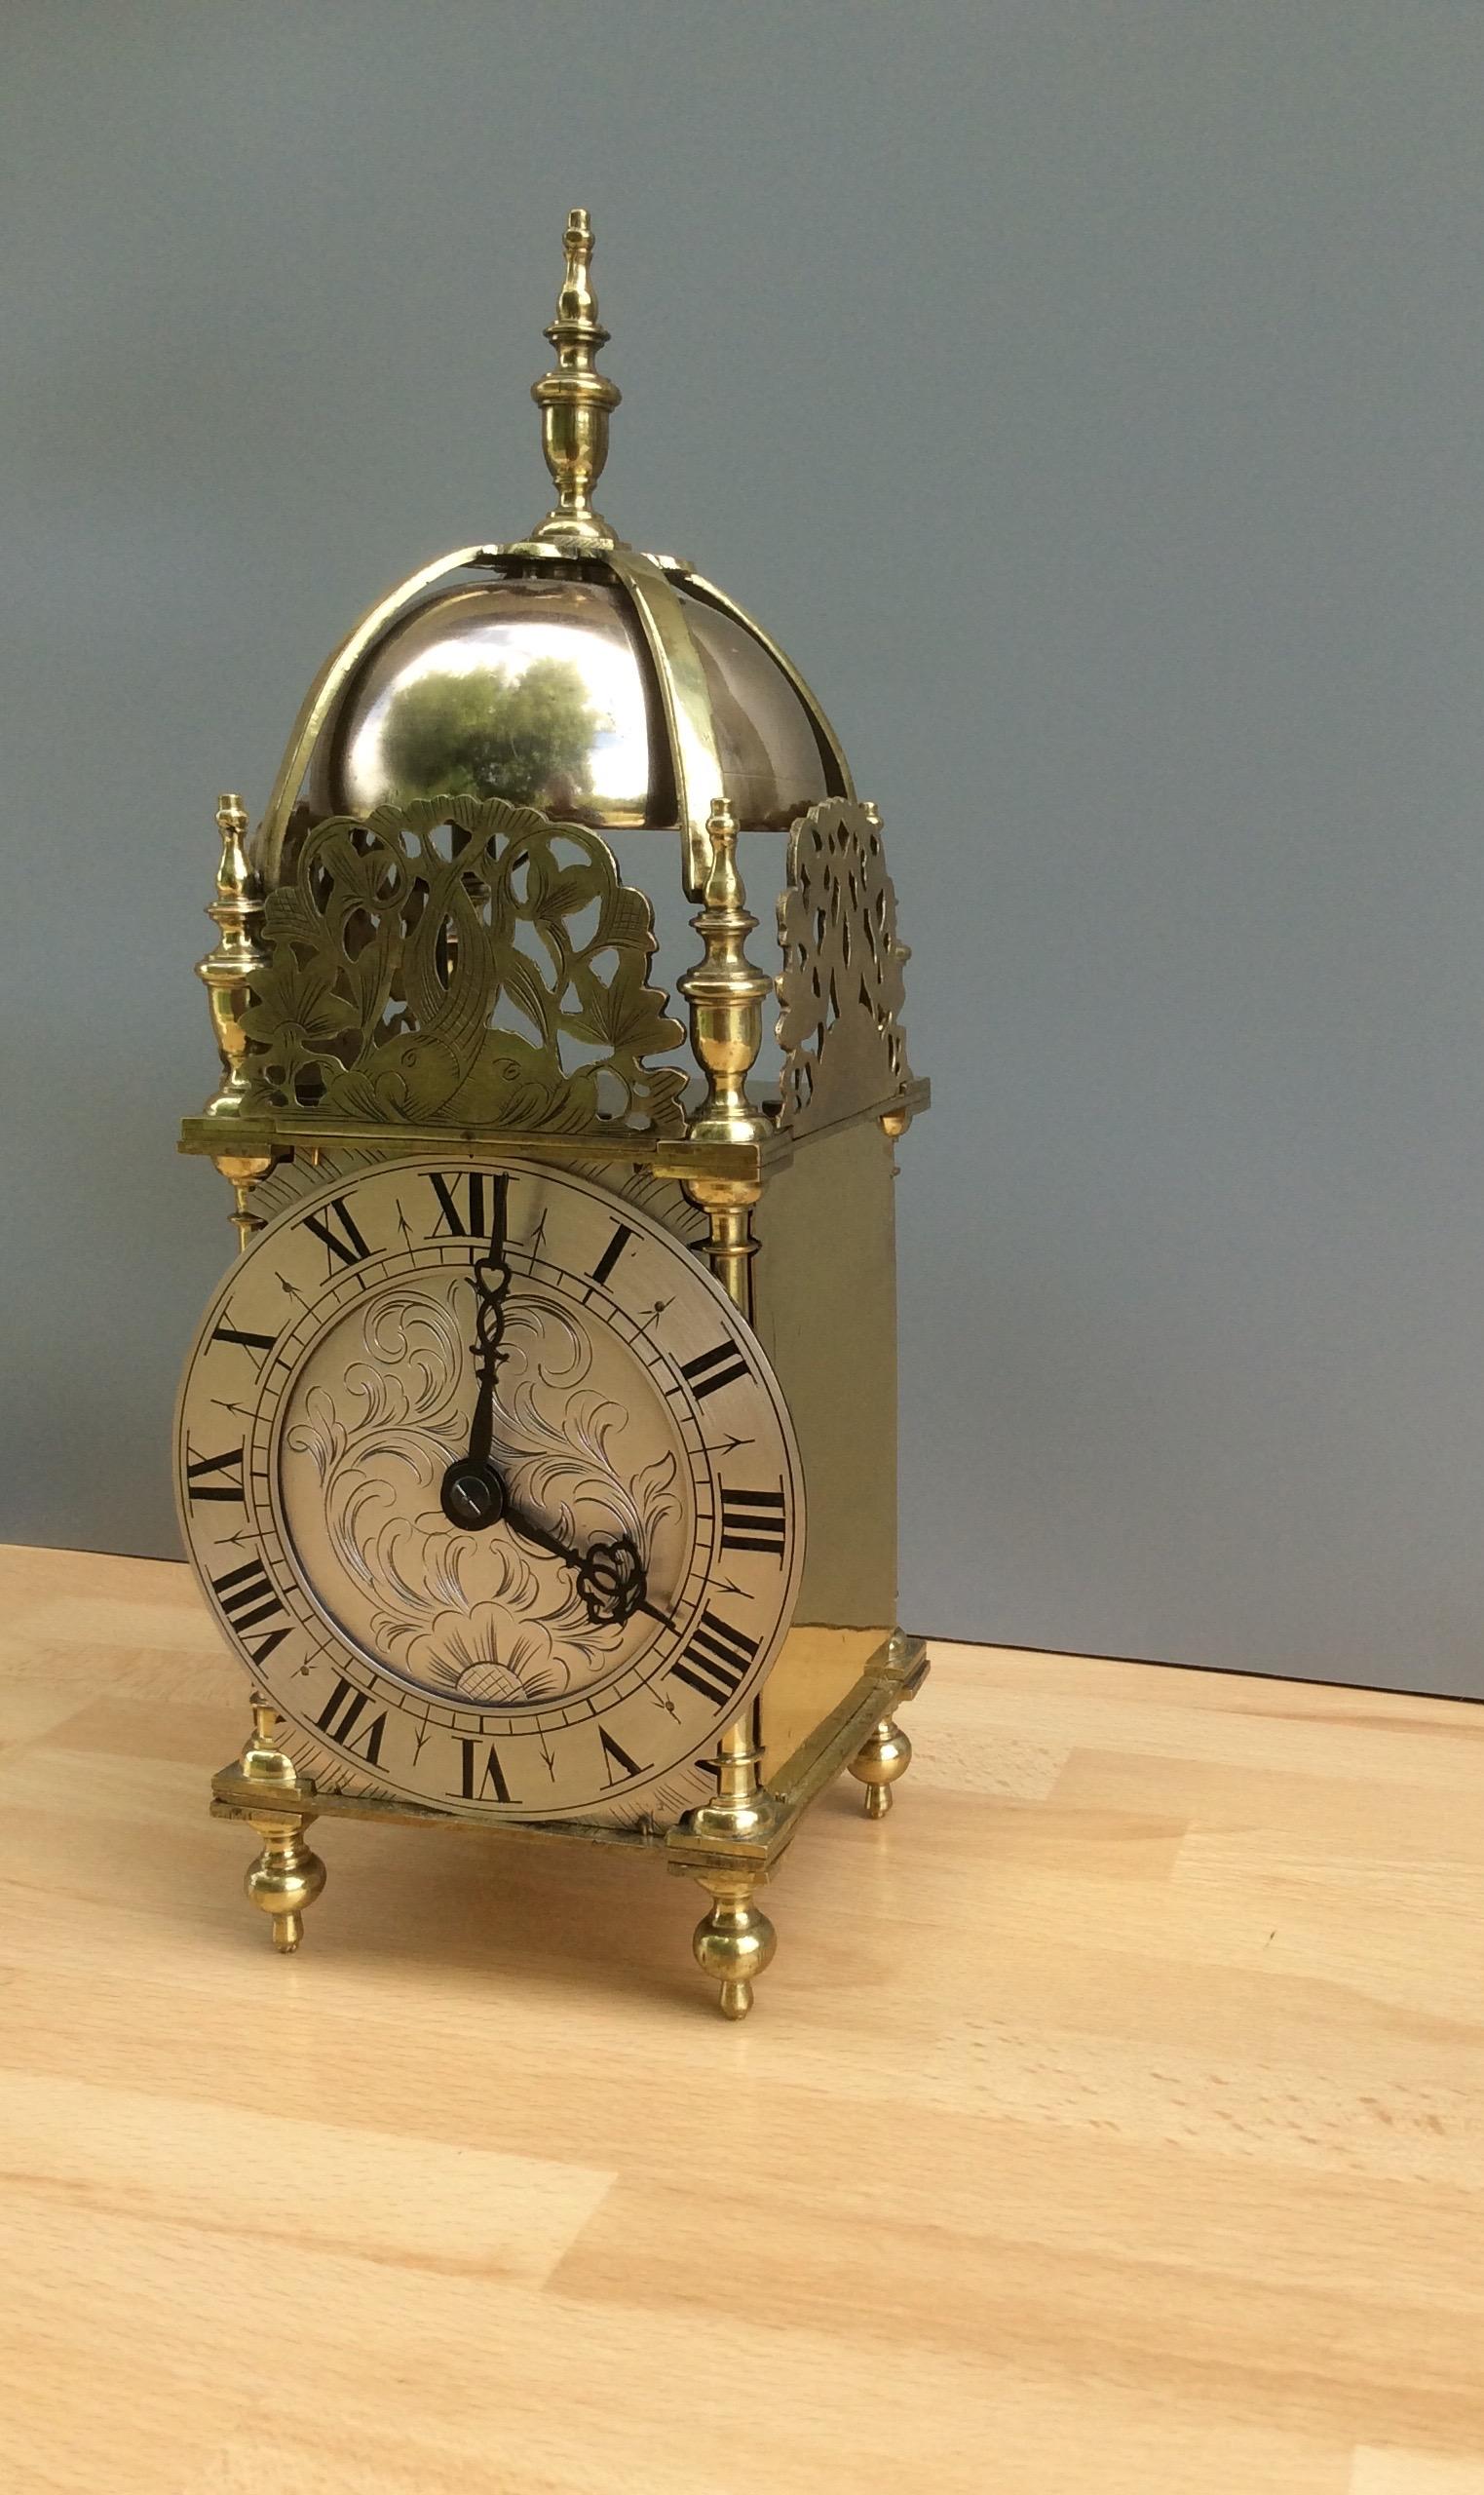 Late Victorian brass lantern clock with silvered dial mask, beautiful engraved and silvered chapter ring with Roman numerals. 8 day French movement striking the hours and halves on a centrally mounted bell, circa 1860.